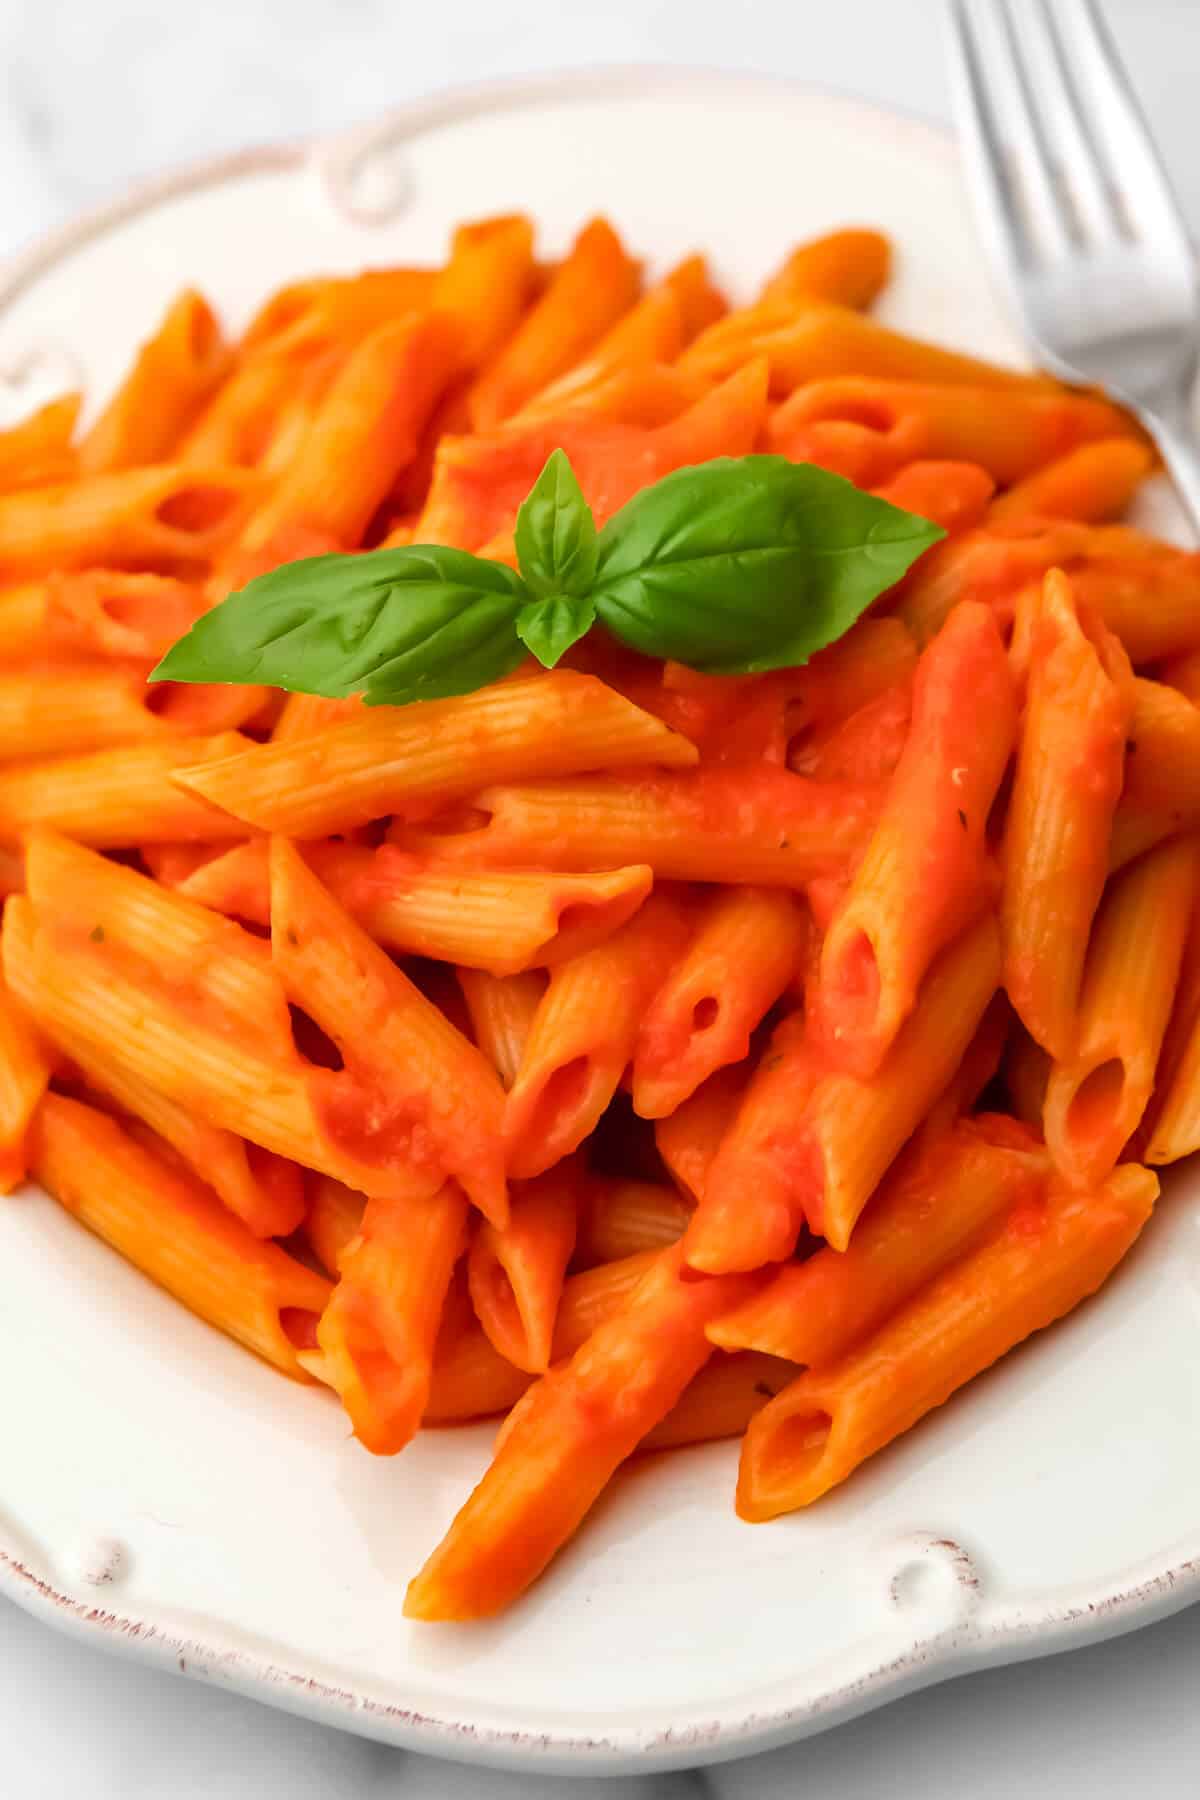 Roasted red pepper and tomato sauce mixed with pene pasta served on a white plate with a fork on the side.